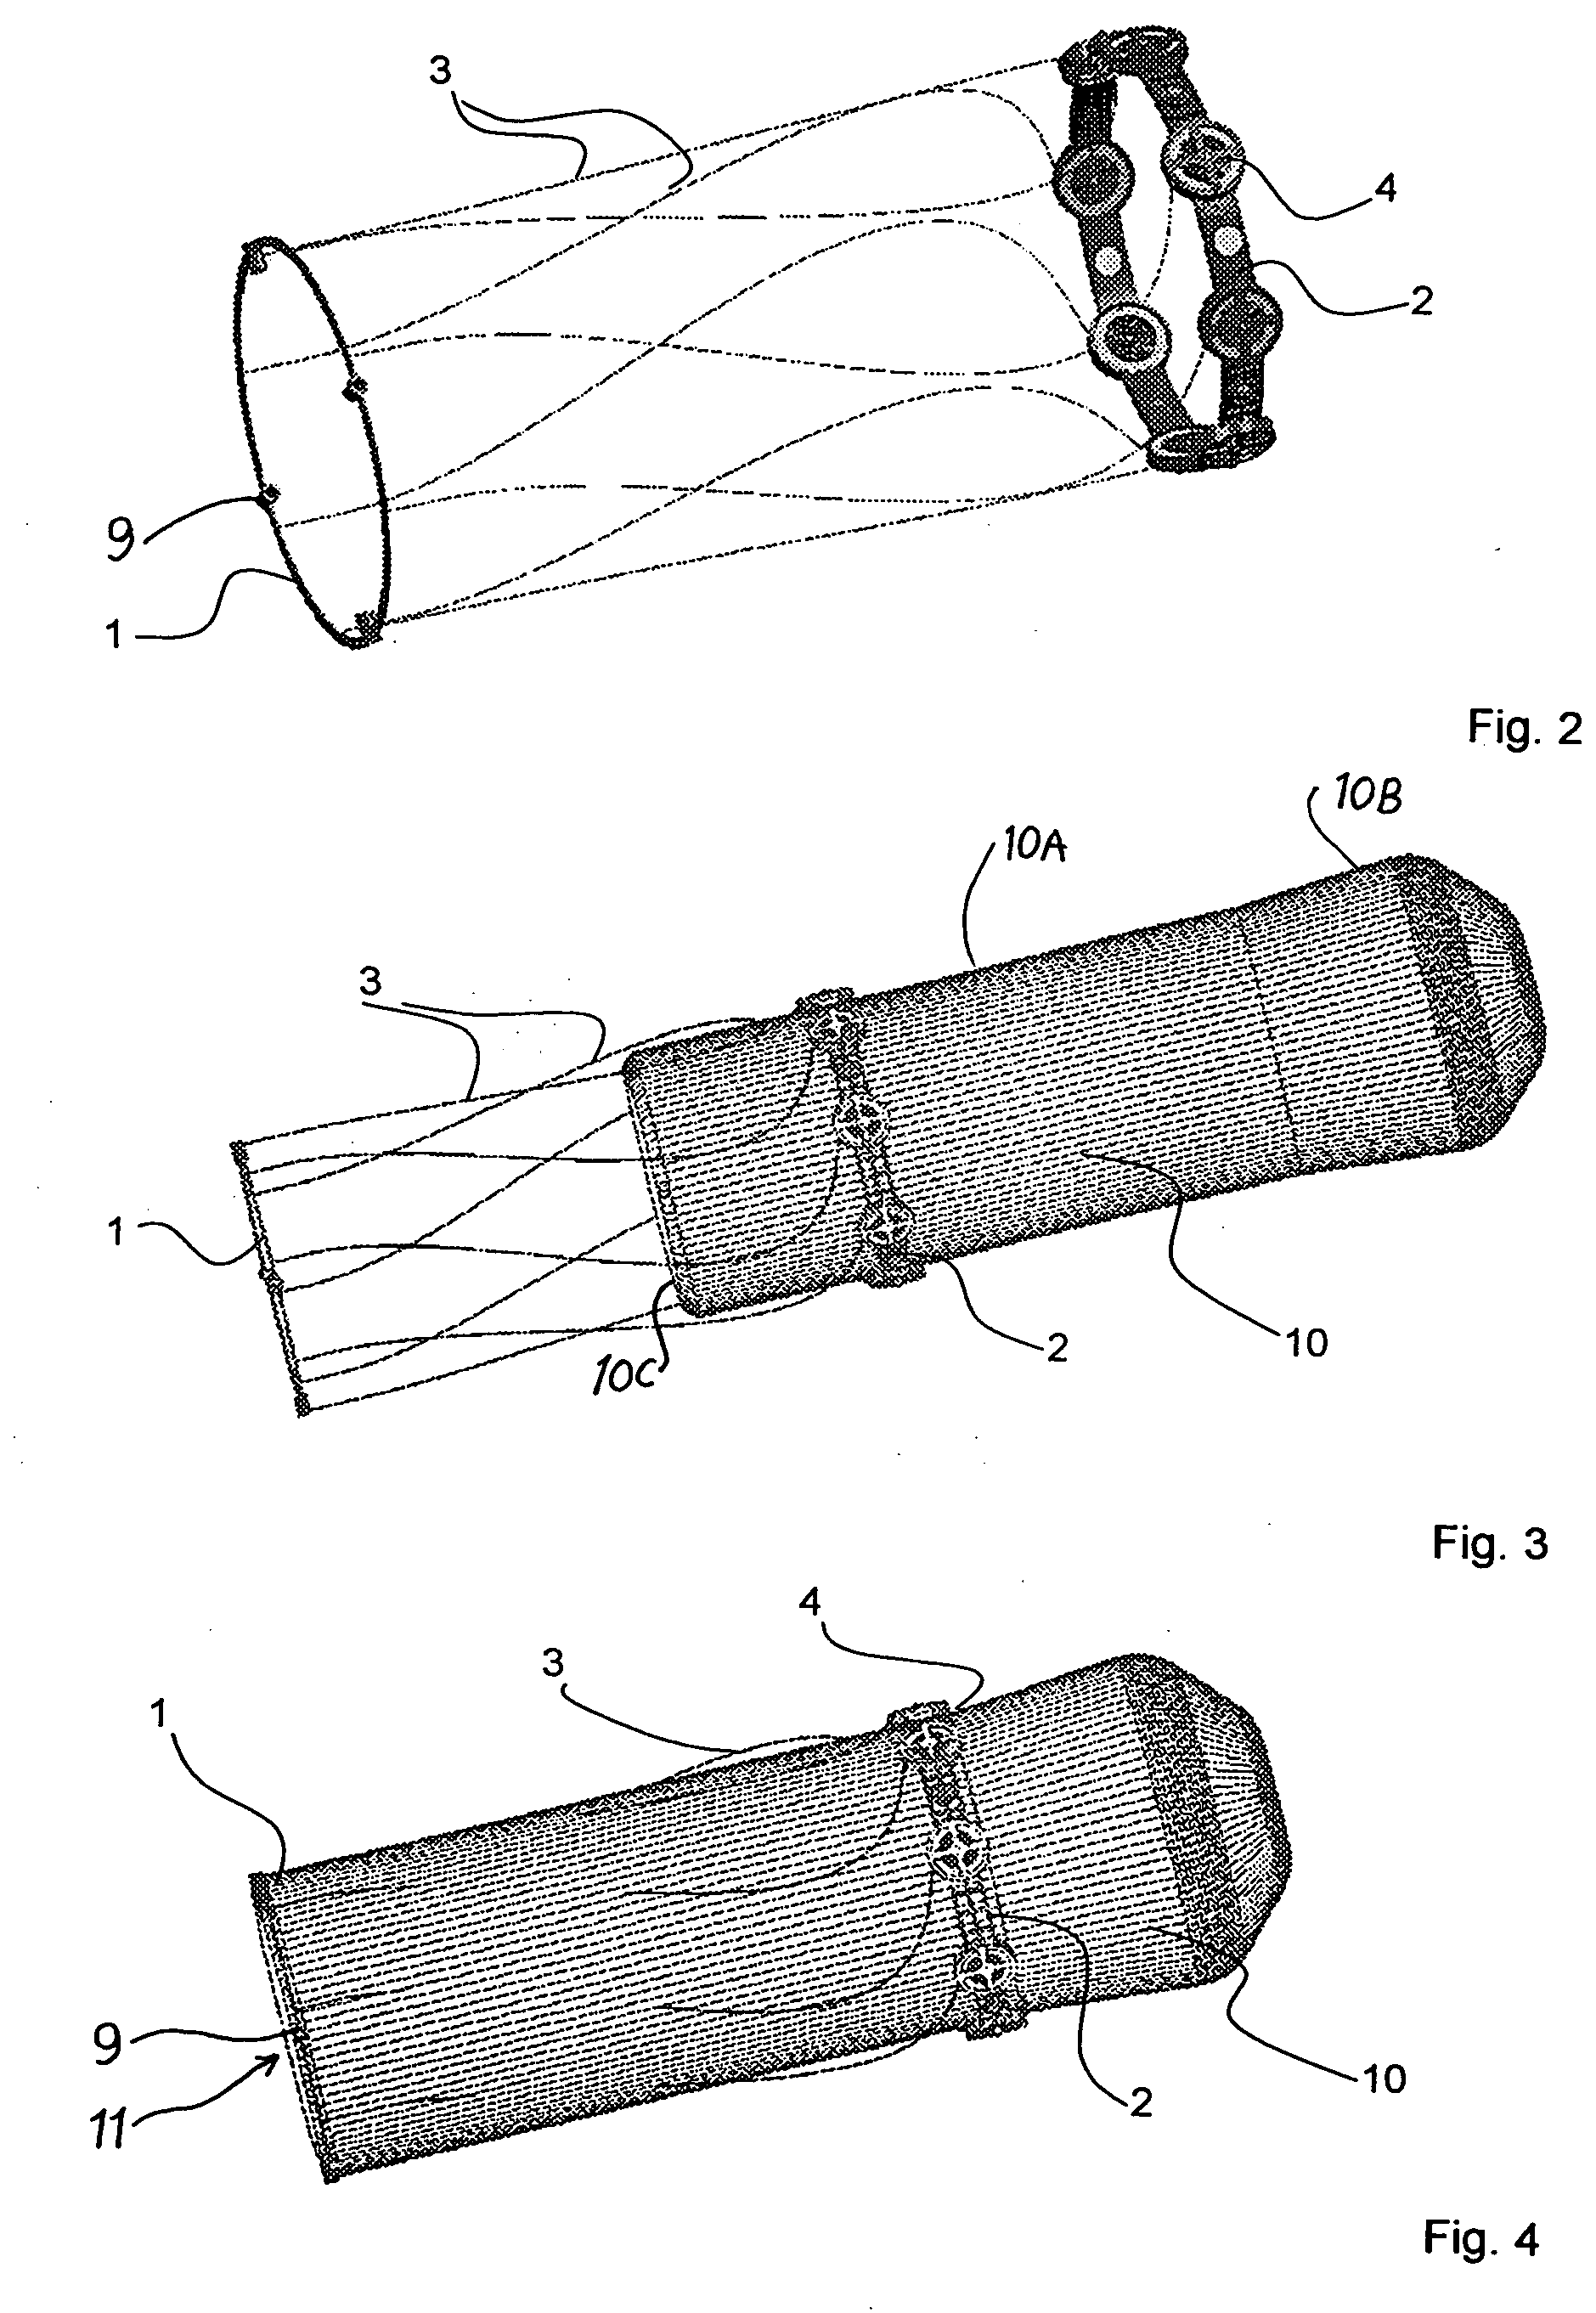 Apparatus with helical tension cables for ejecting a spin-stabilized body from a spacecraft